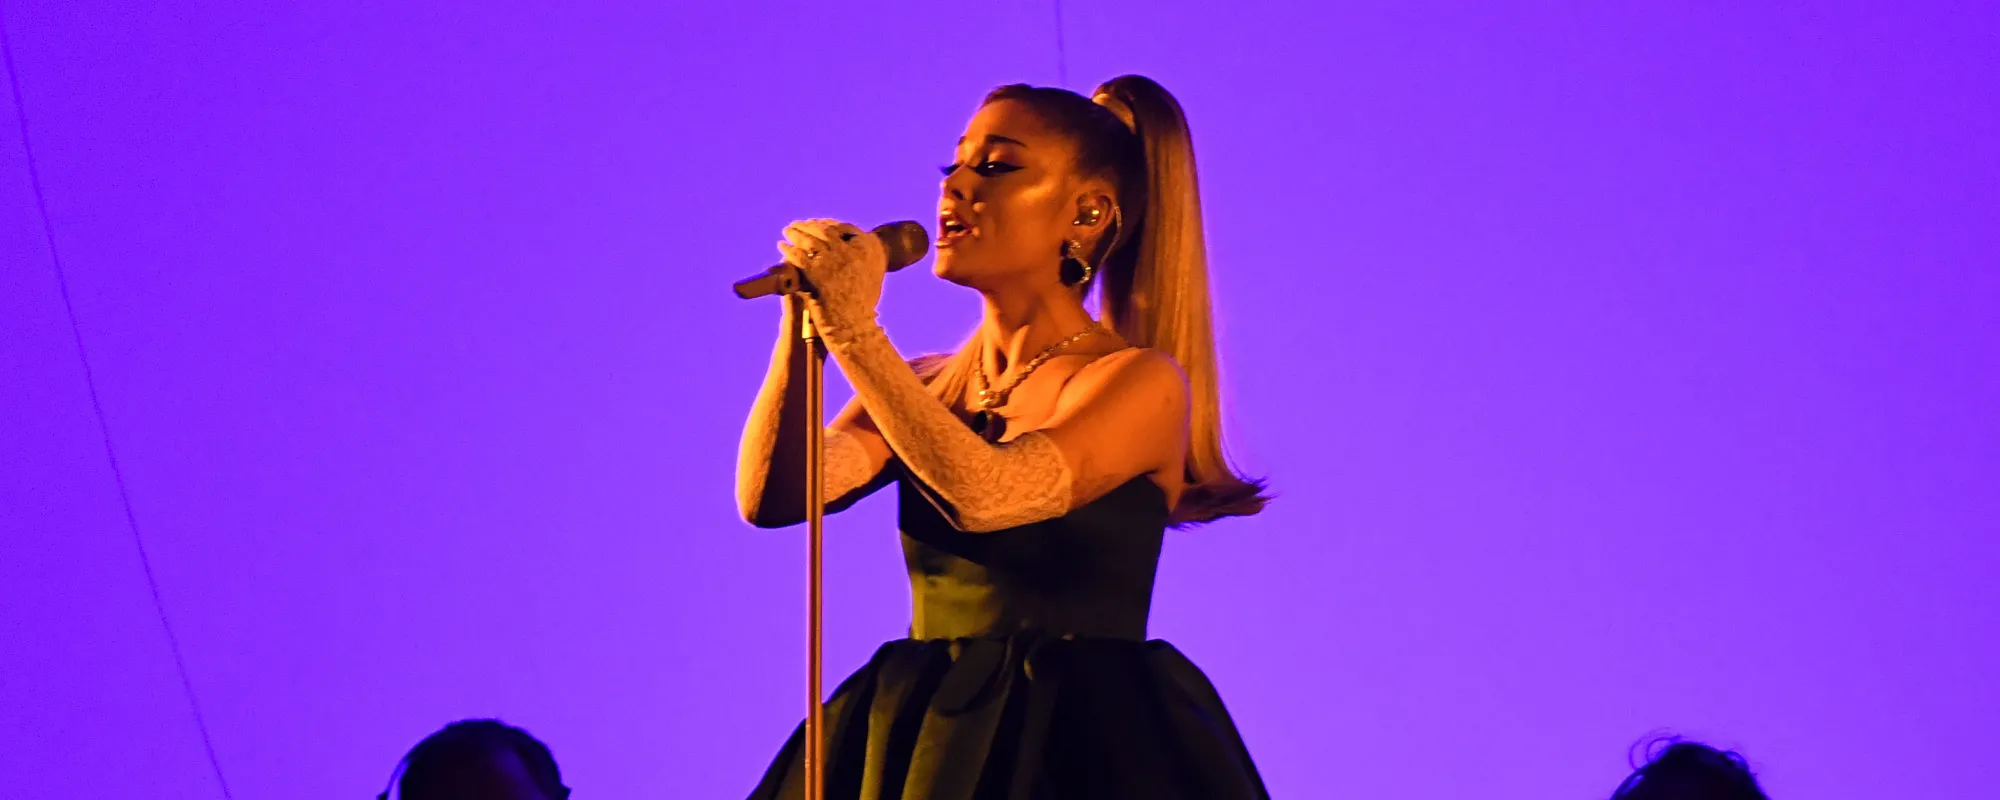 5 Deep Cuts from Ariana Grande That You Should Check Out